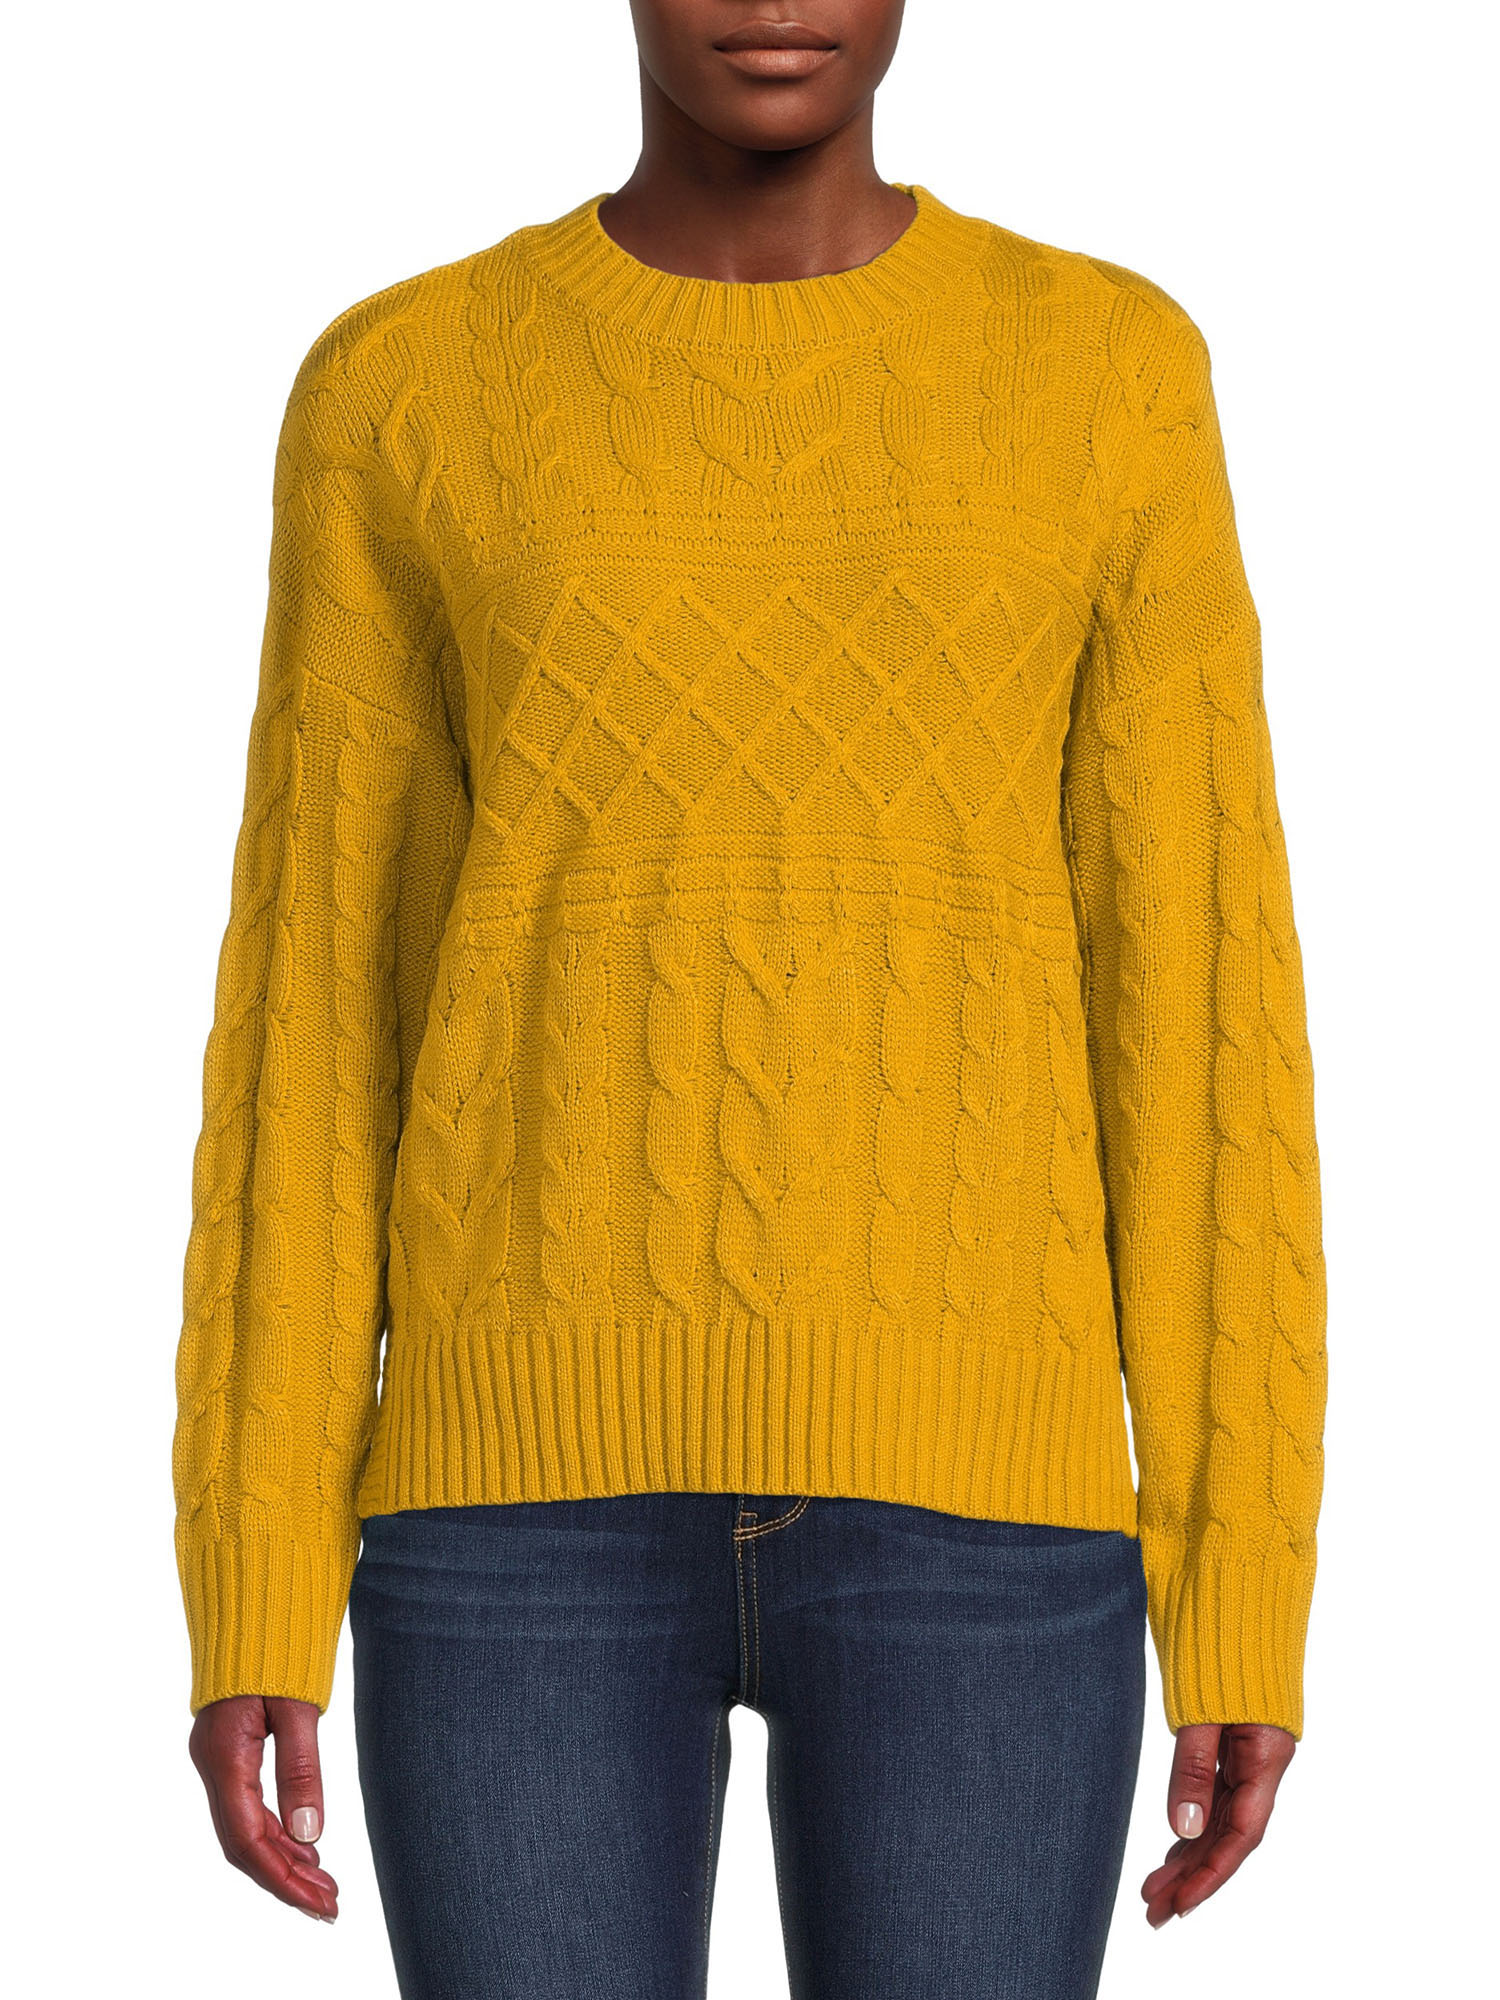 Time and Tru Women's Mixed Stitch Sweater - image 1 of 5